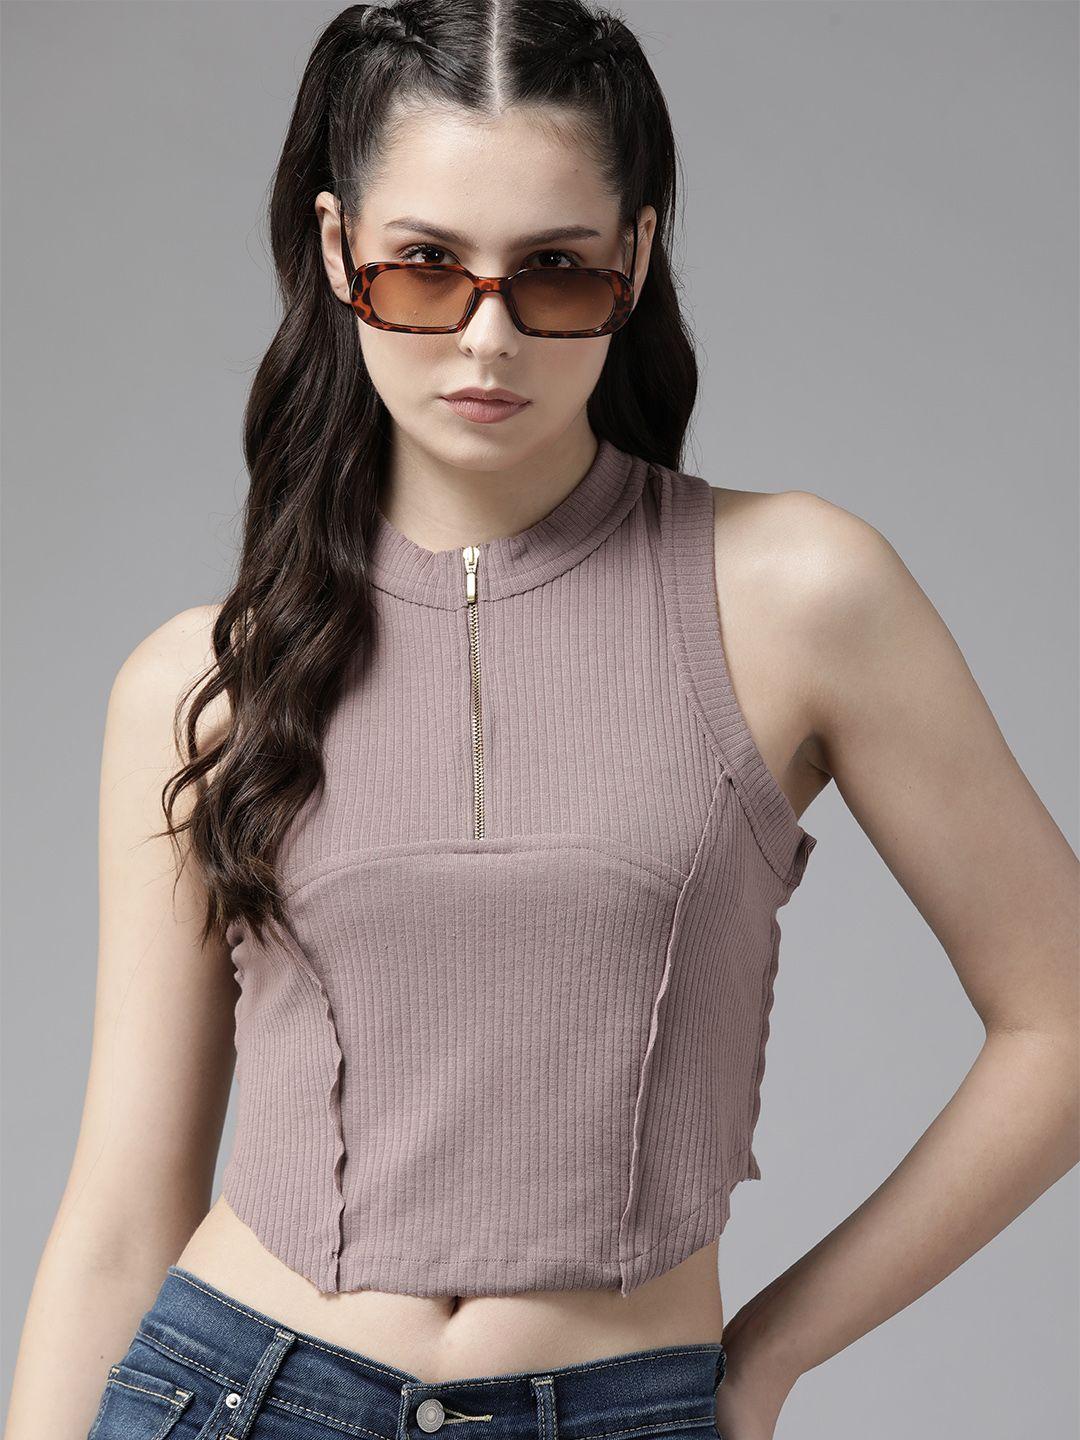 the roadster lifestyle co. ribbed half zipper crop tank top